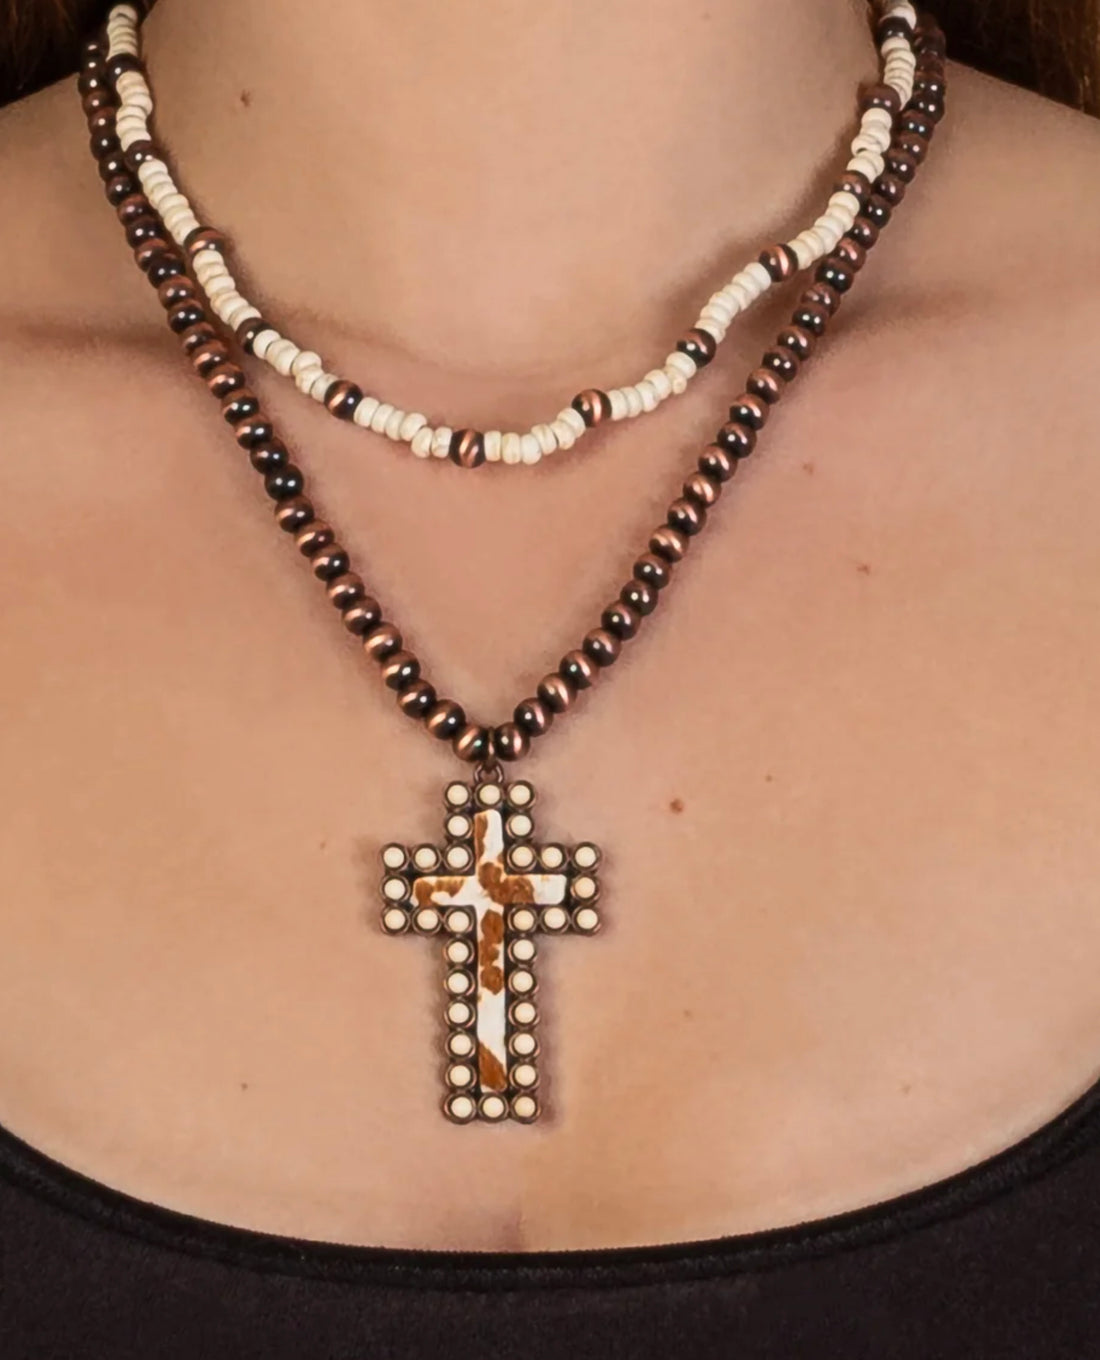 Animal Print Cross Necklace with Matching Earrings